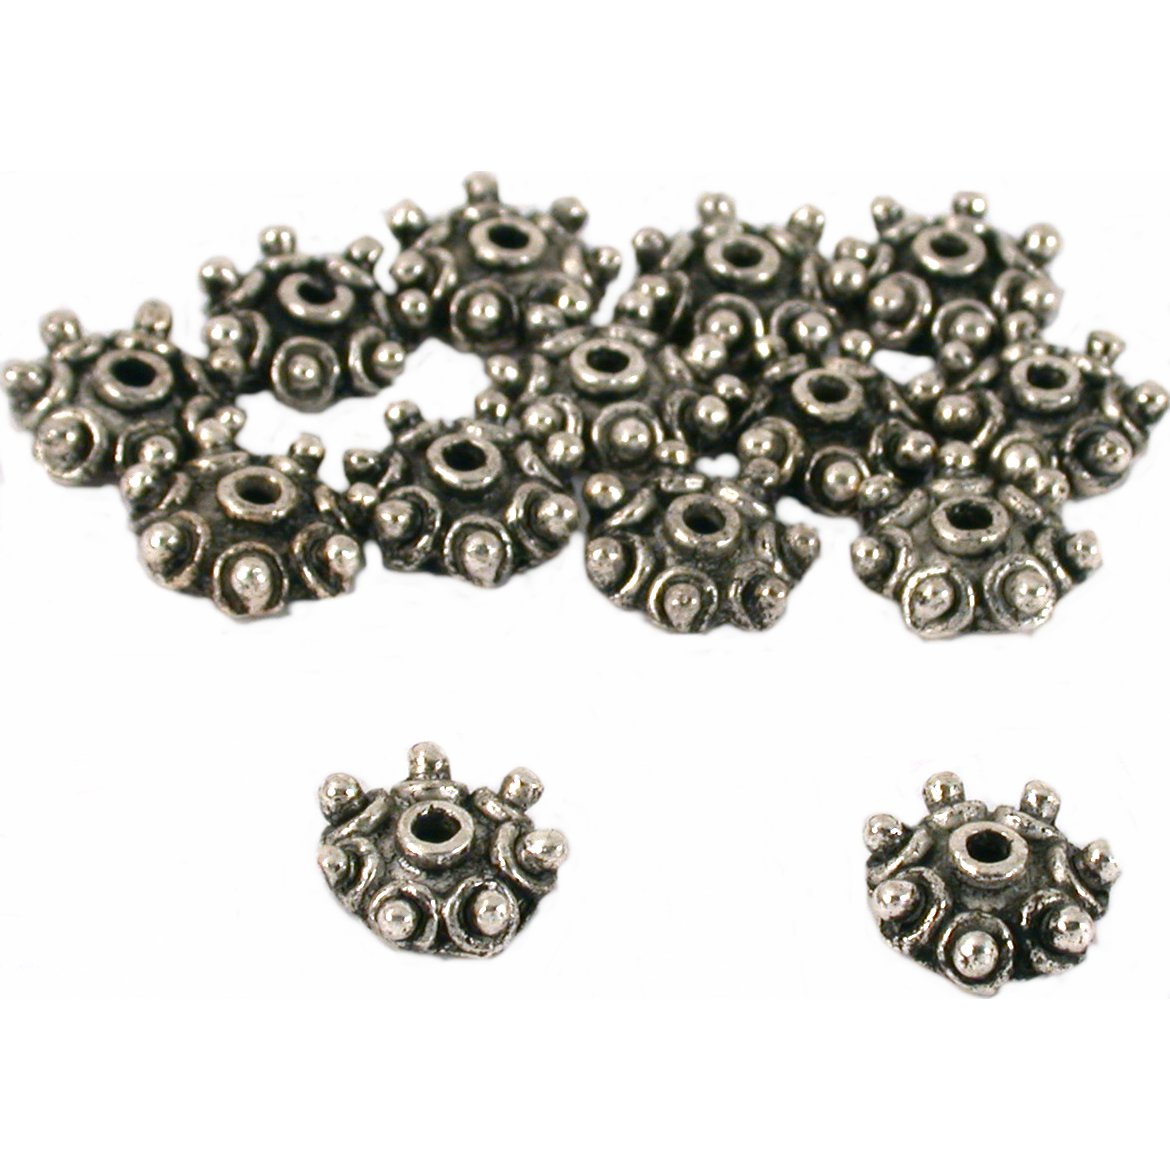 Bali Bead Caps Antique Silver Plated 10.5mm 15 Grams 14Pcs Approx.